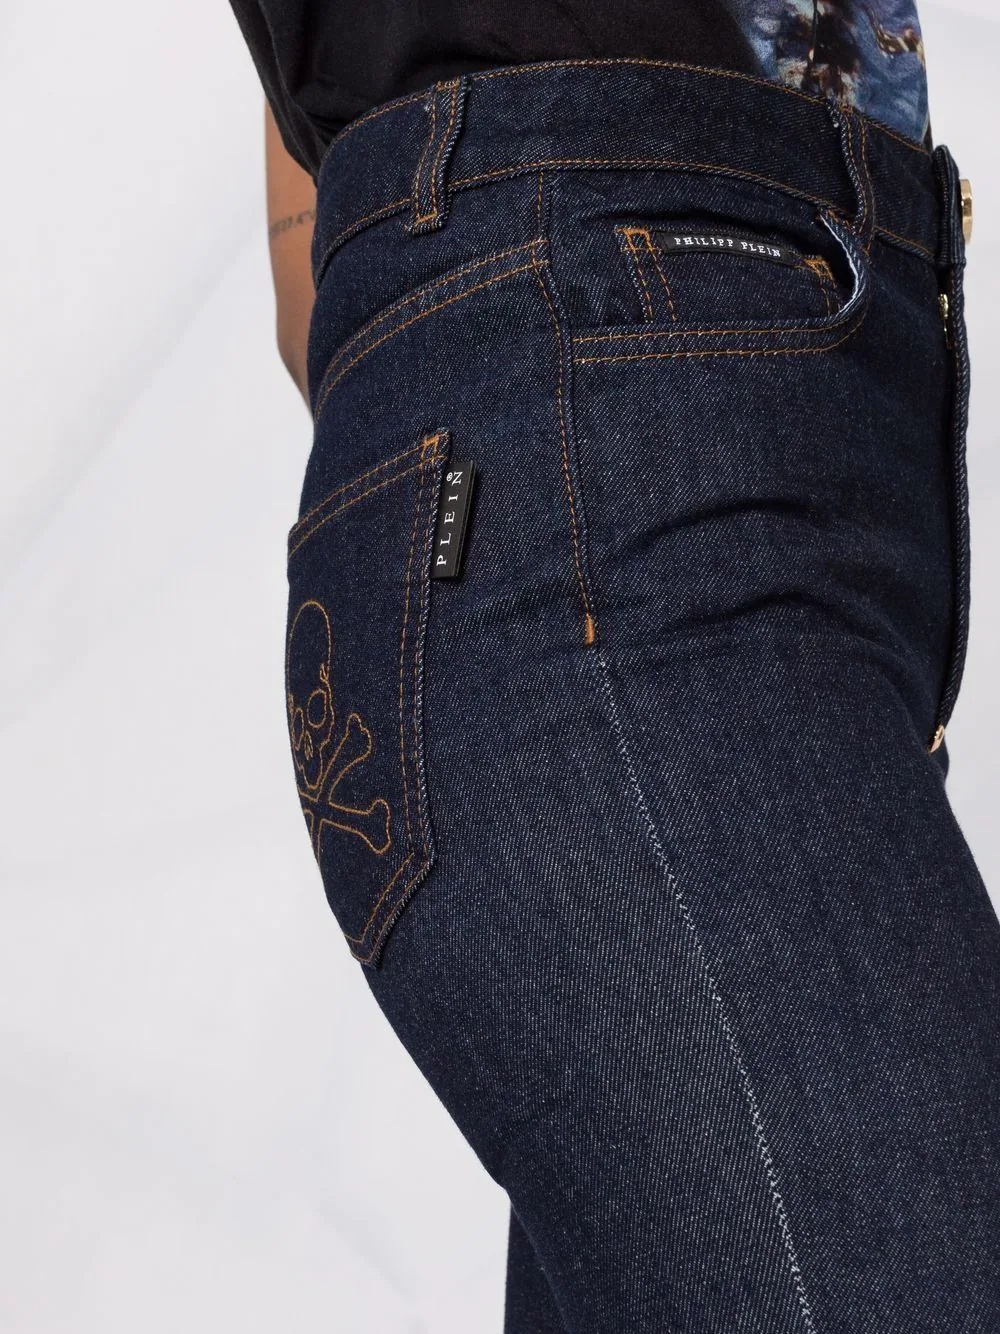 high-waisted flared jeans - 5